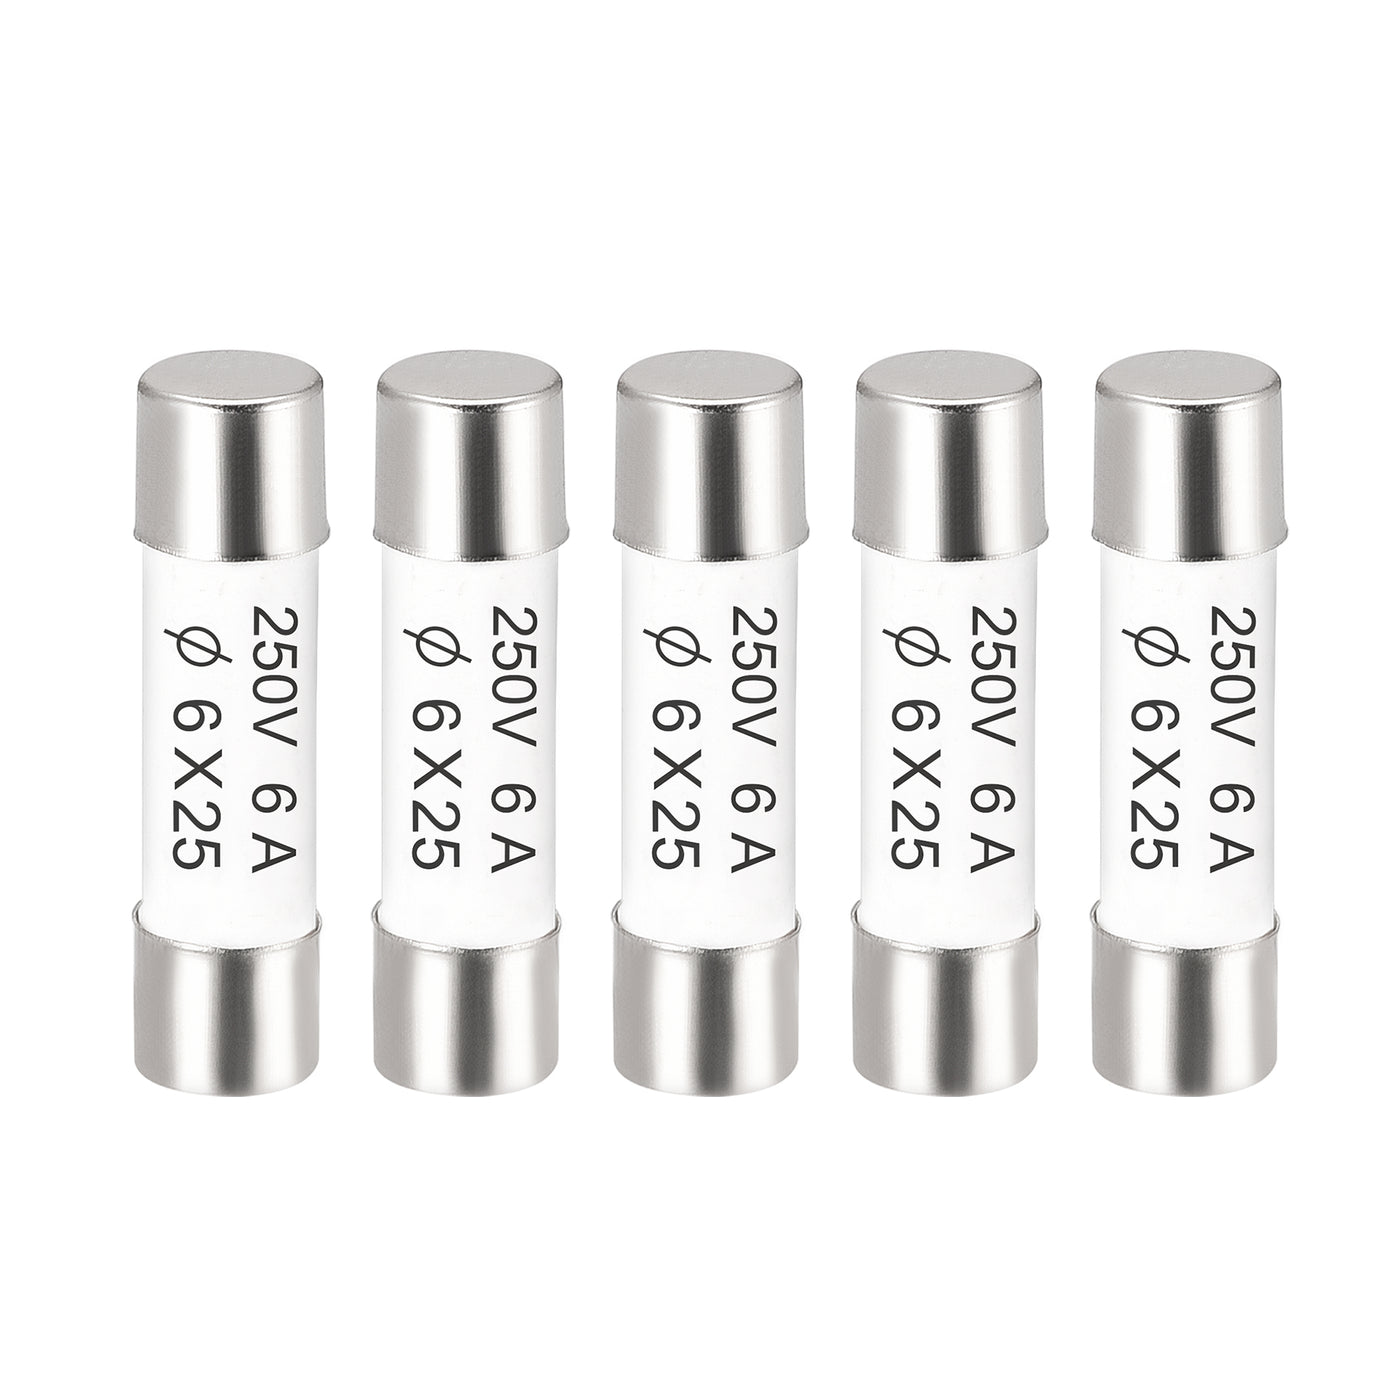 uxcell Uxcell Ceramic Cartridge Fuses 6A 250V 6x25mm Fast Blow for Energy Saving Lamp 5pcs